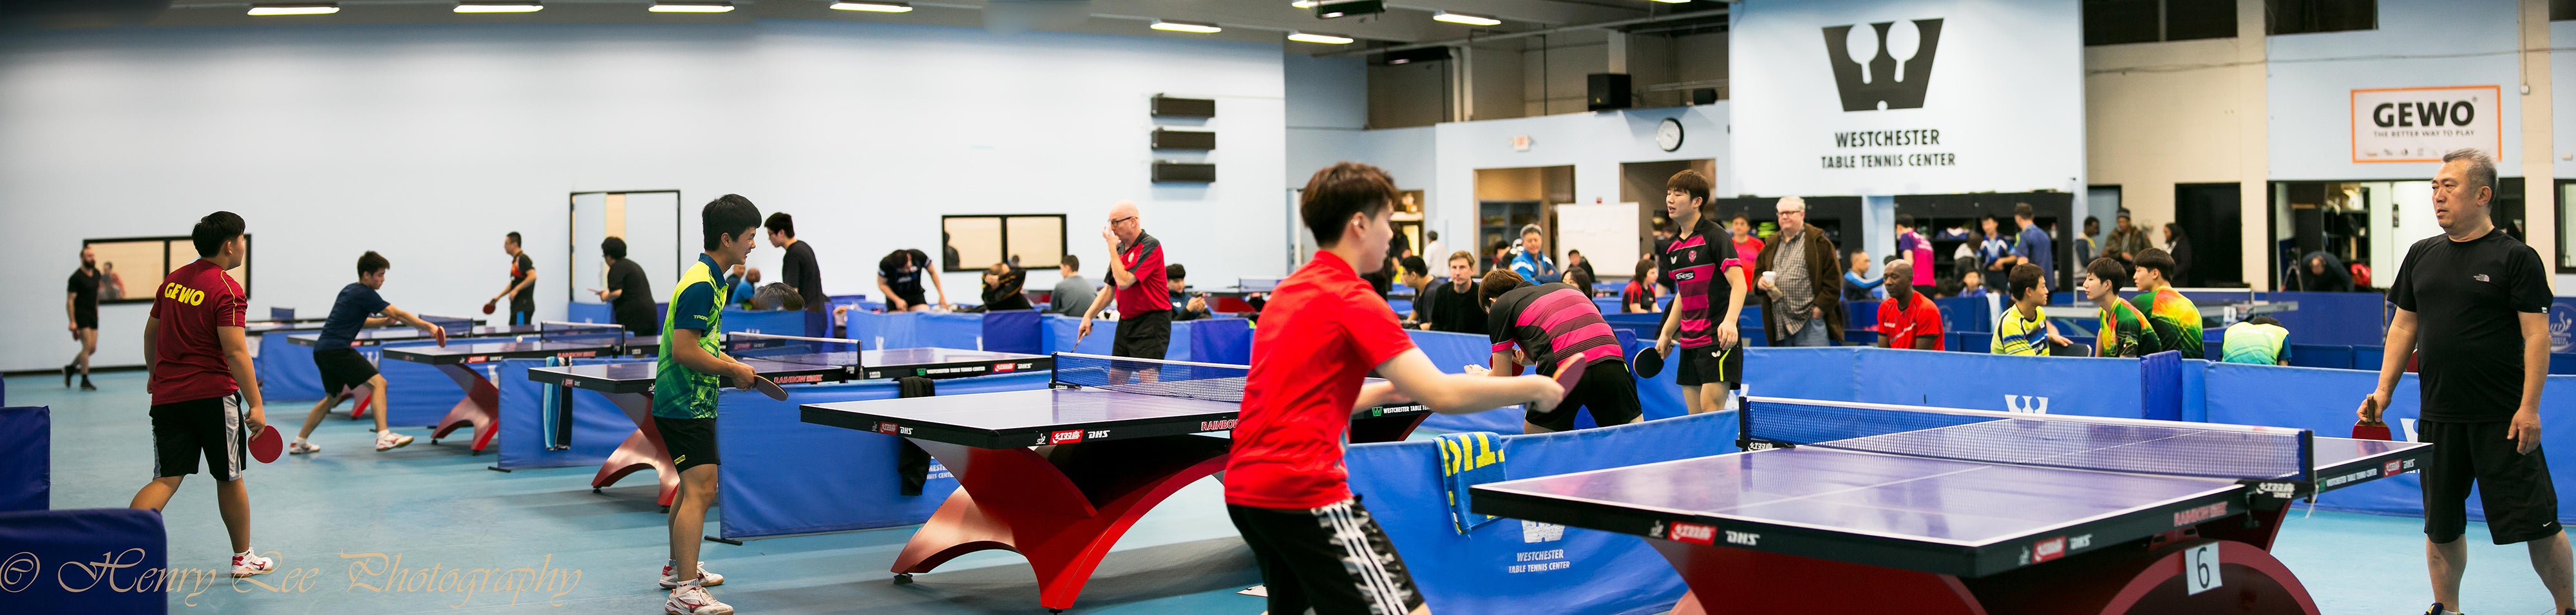 North America's complete Table Tennis & Ping Pong Store